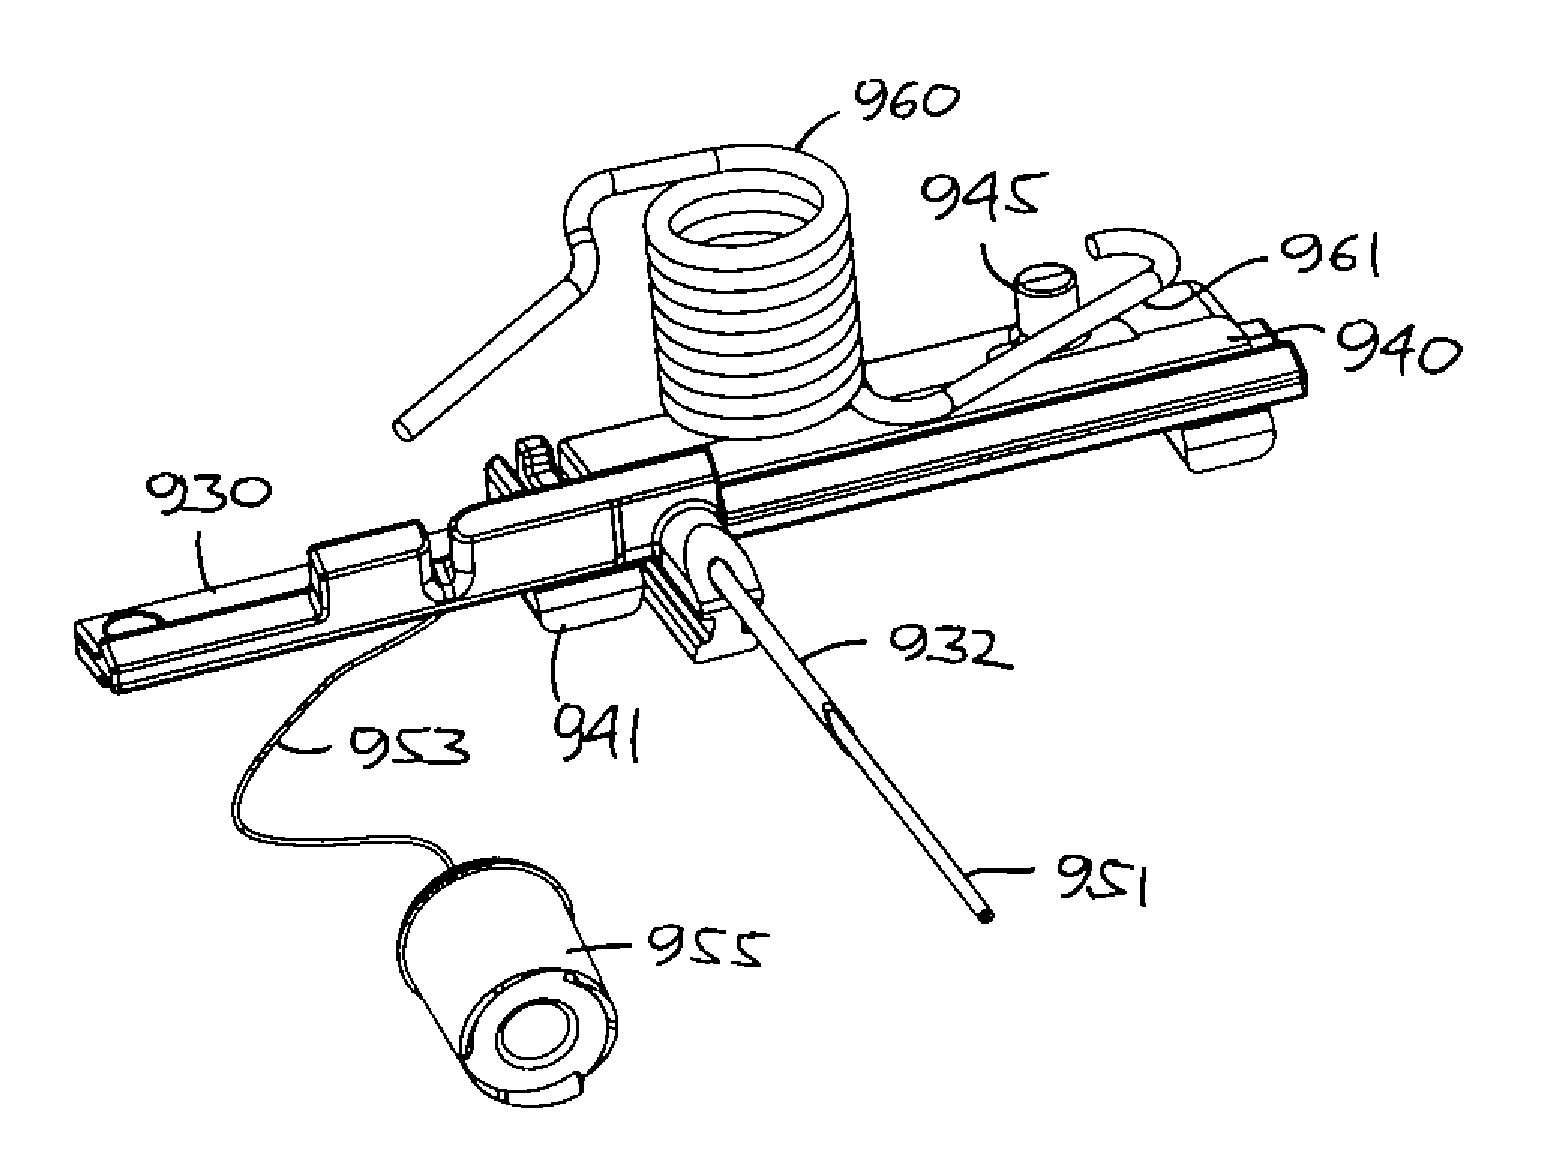 Transcutaneous device assembly